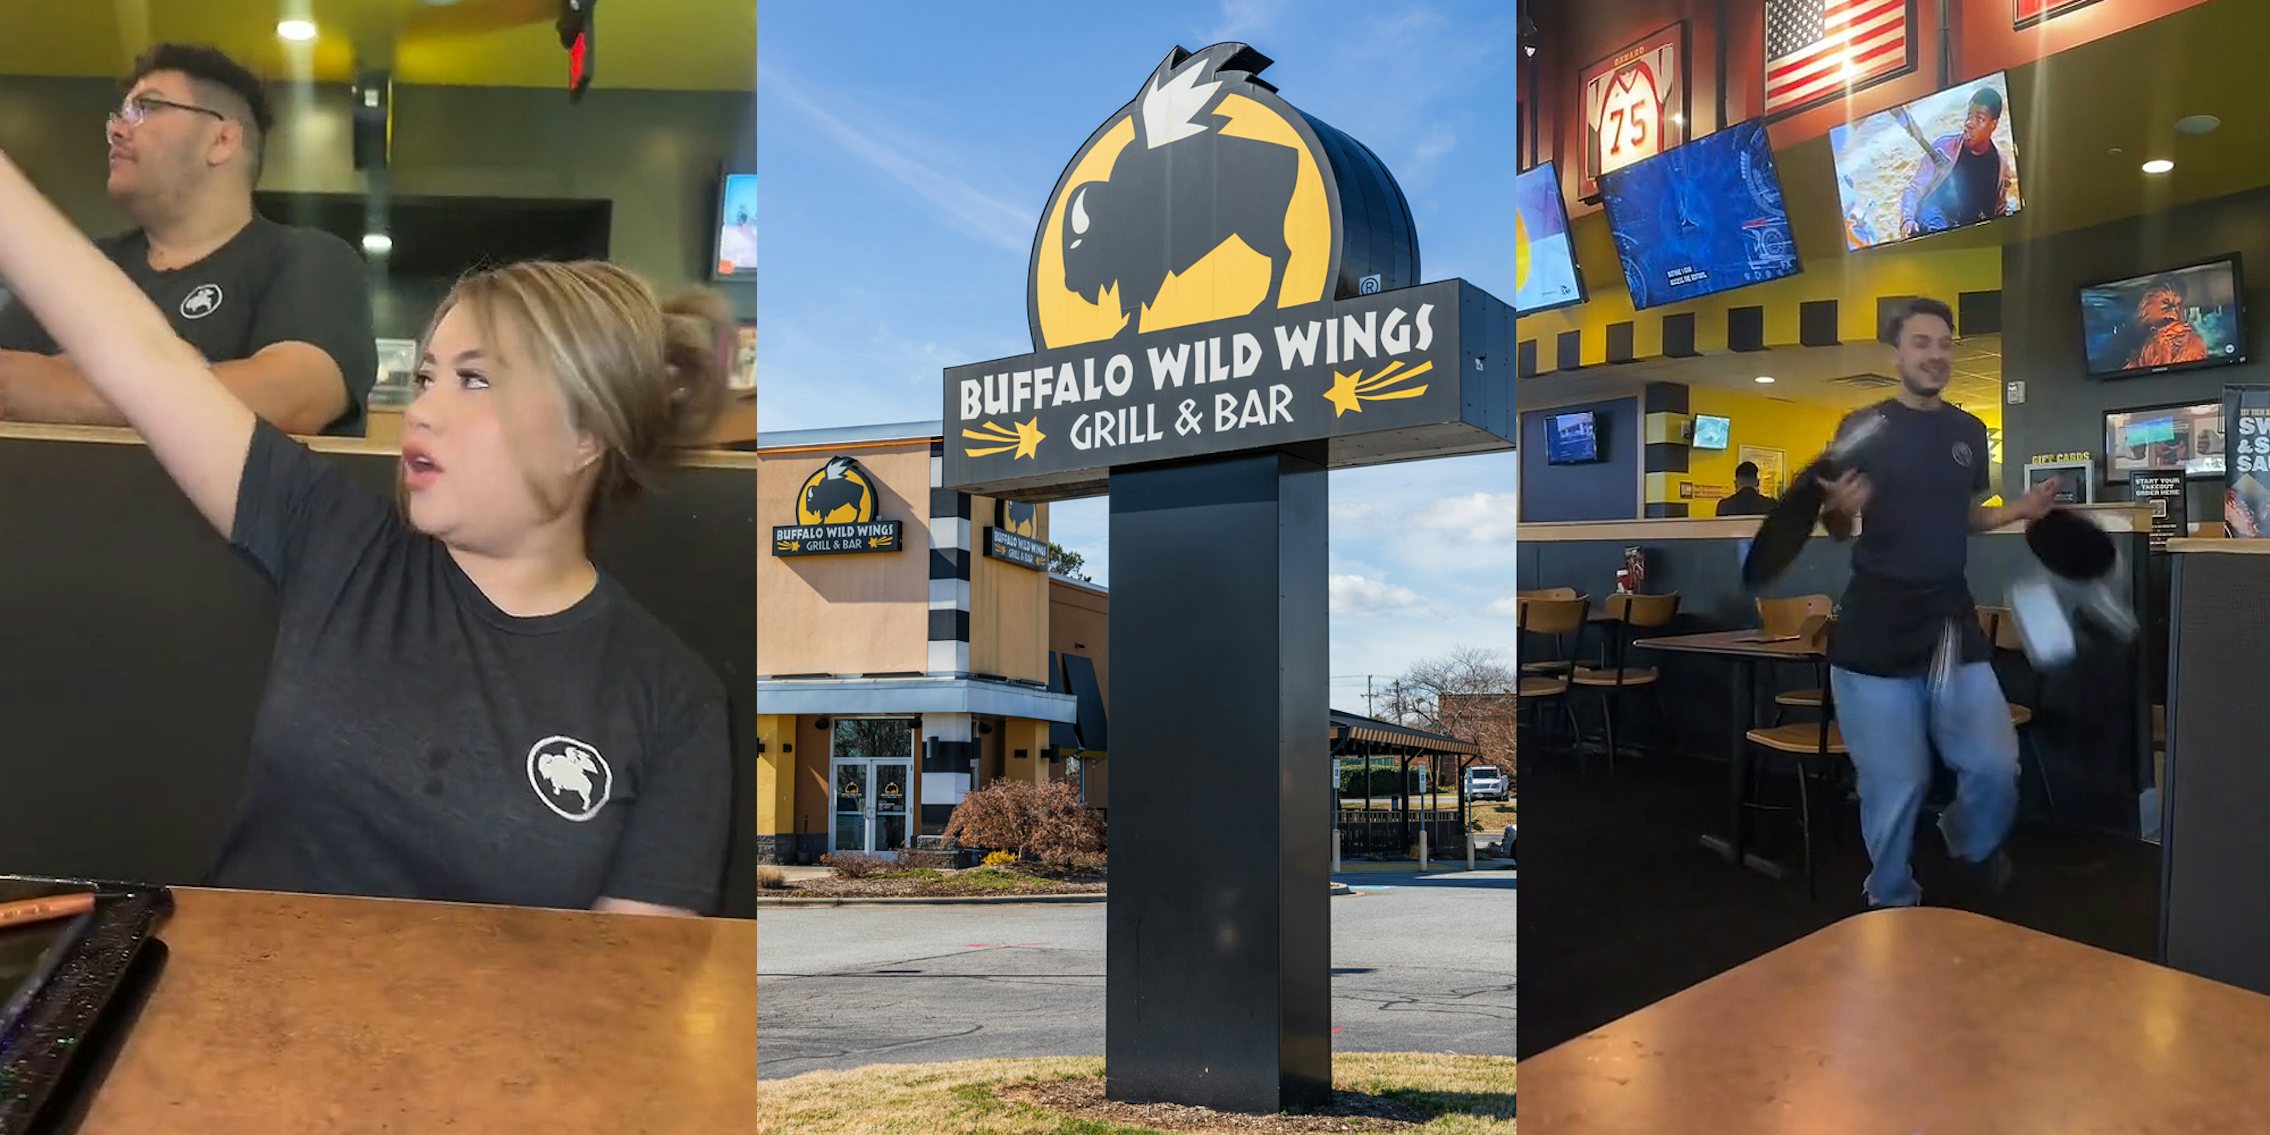 Buffalo Wild Wings customer waving arm calling server over (l) Buffalo Wild Wings sign in front of building (c) Buffalo Wild Wings server dropping platter of drinks (r)